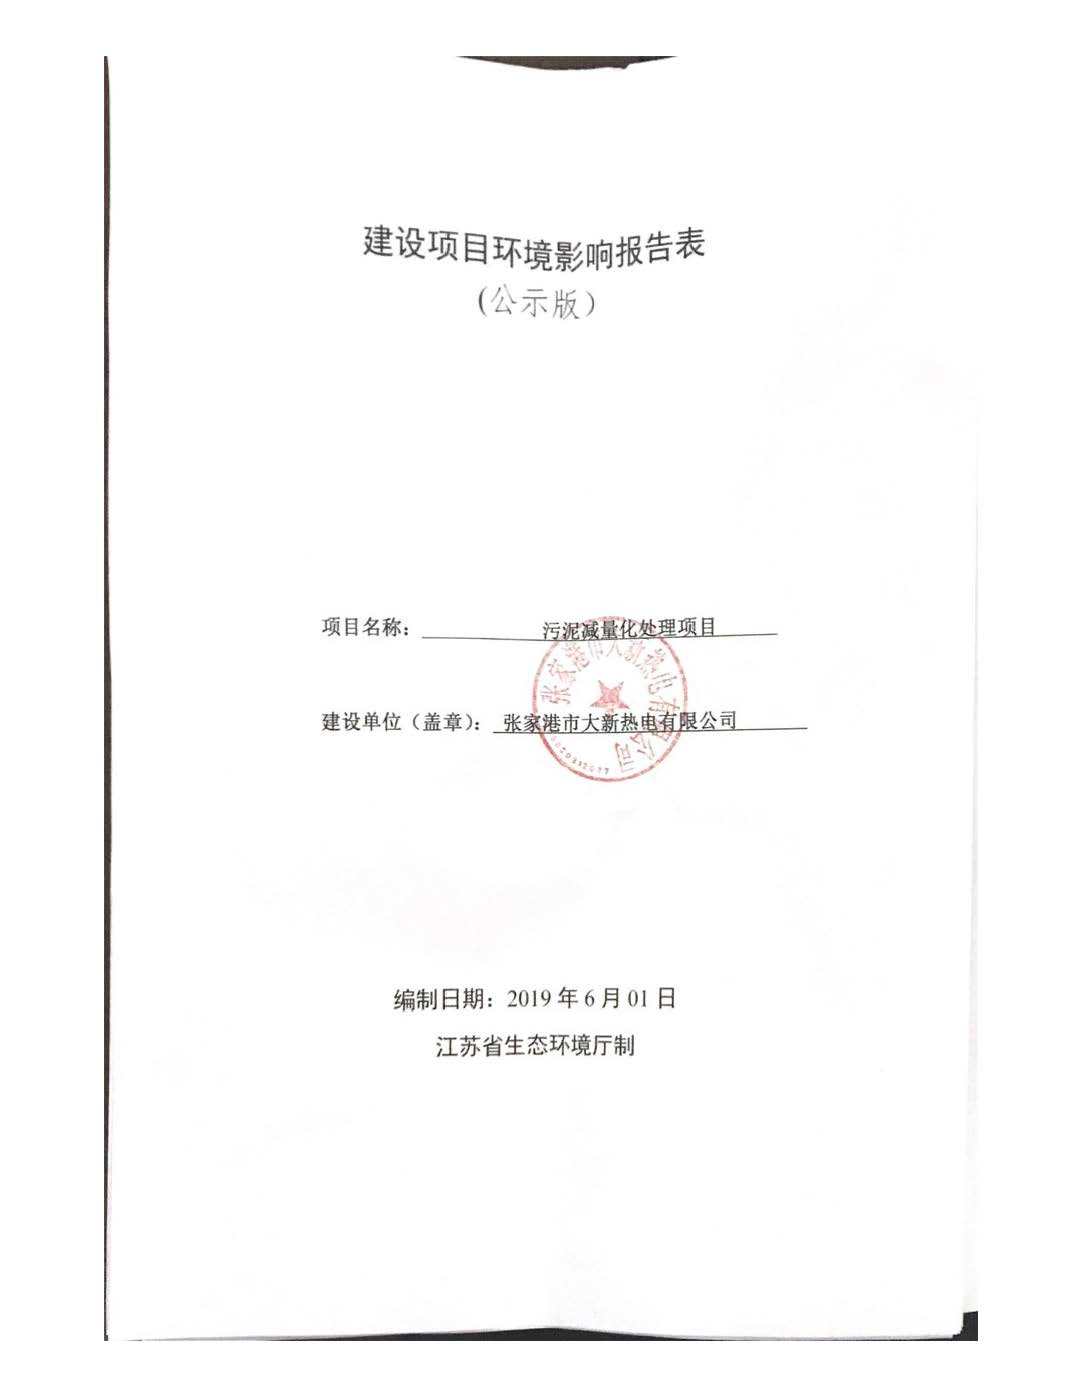 Zhanggang Daxin Thermal Power Co., Ltd. Environmental Impact Assessment Report Publicity